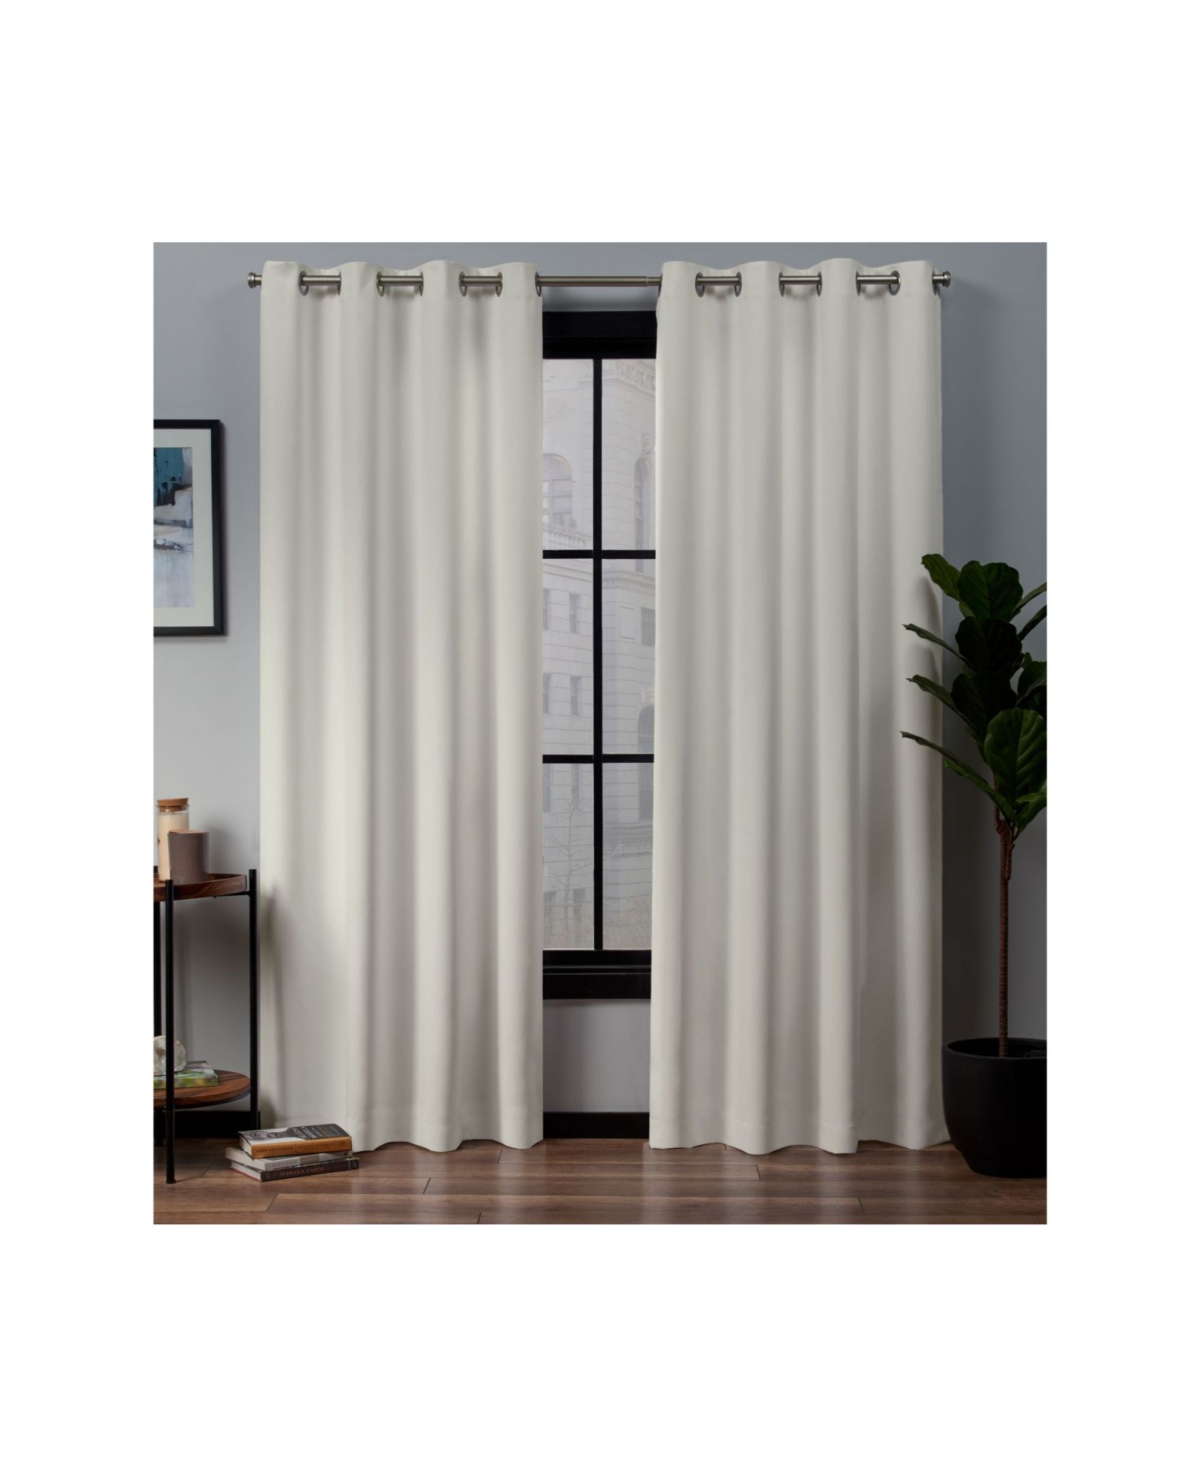 Curtains Academy Total Blackout Grommet Top Curtain Panel Pair, 52" x 108" - Ivory